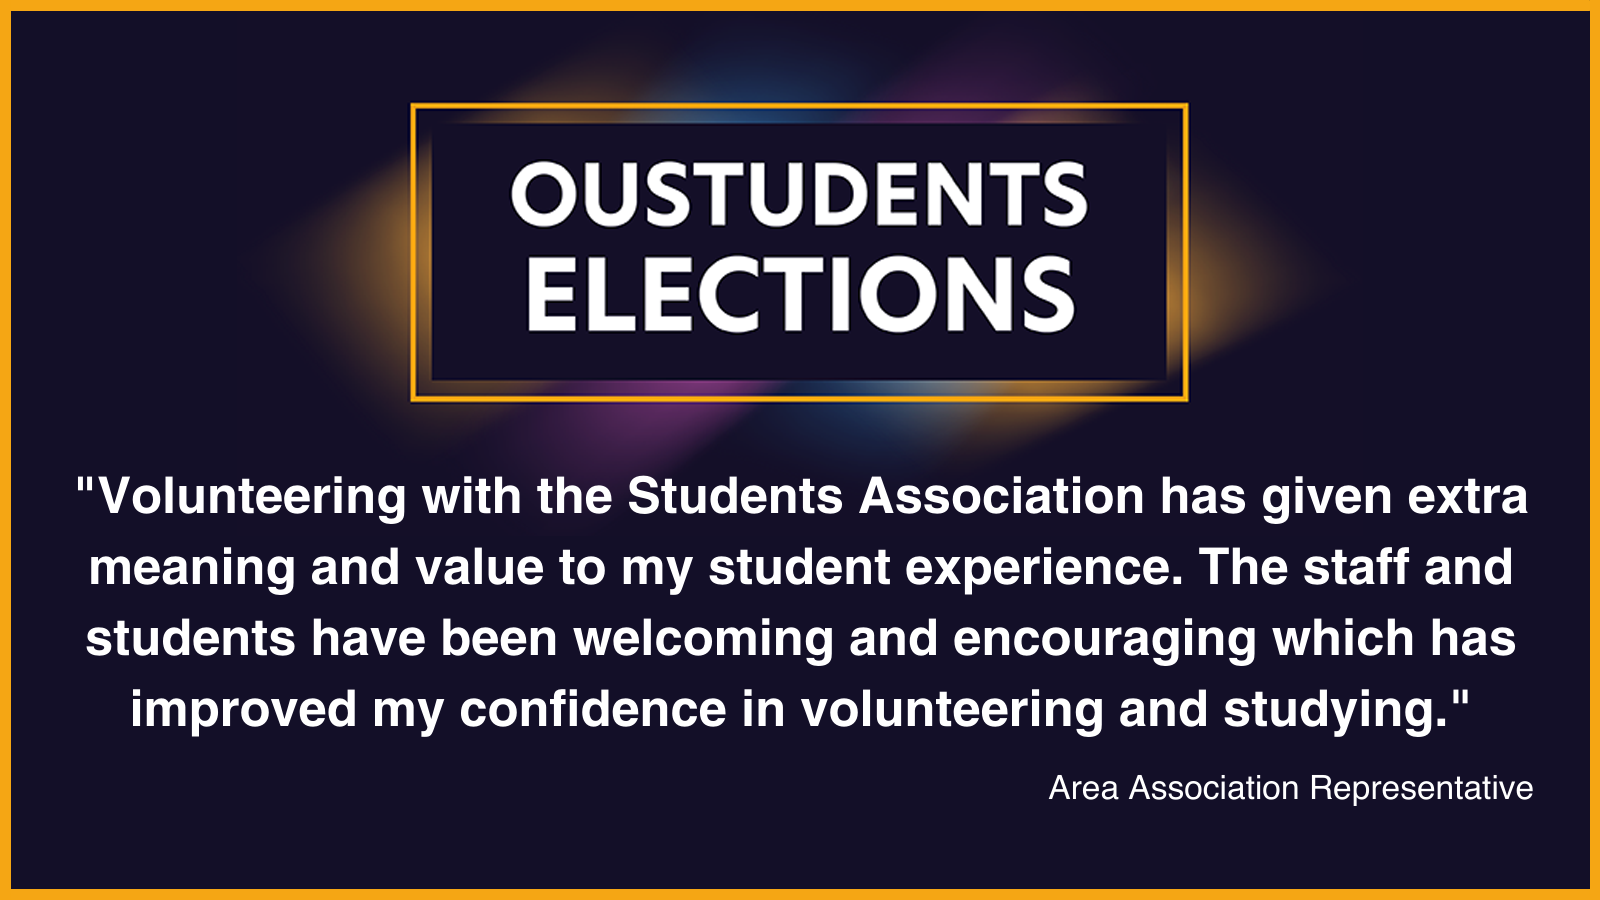 Quote from an area association rep: "Volunteering with the students association has given meaning and value to my student experience. The staff and students have been welcoming and encouraging which has improved my confidence in volunteering and studying."